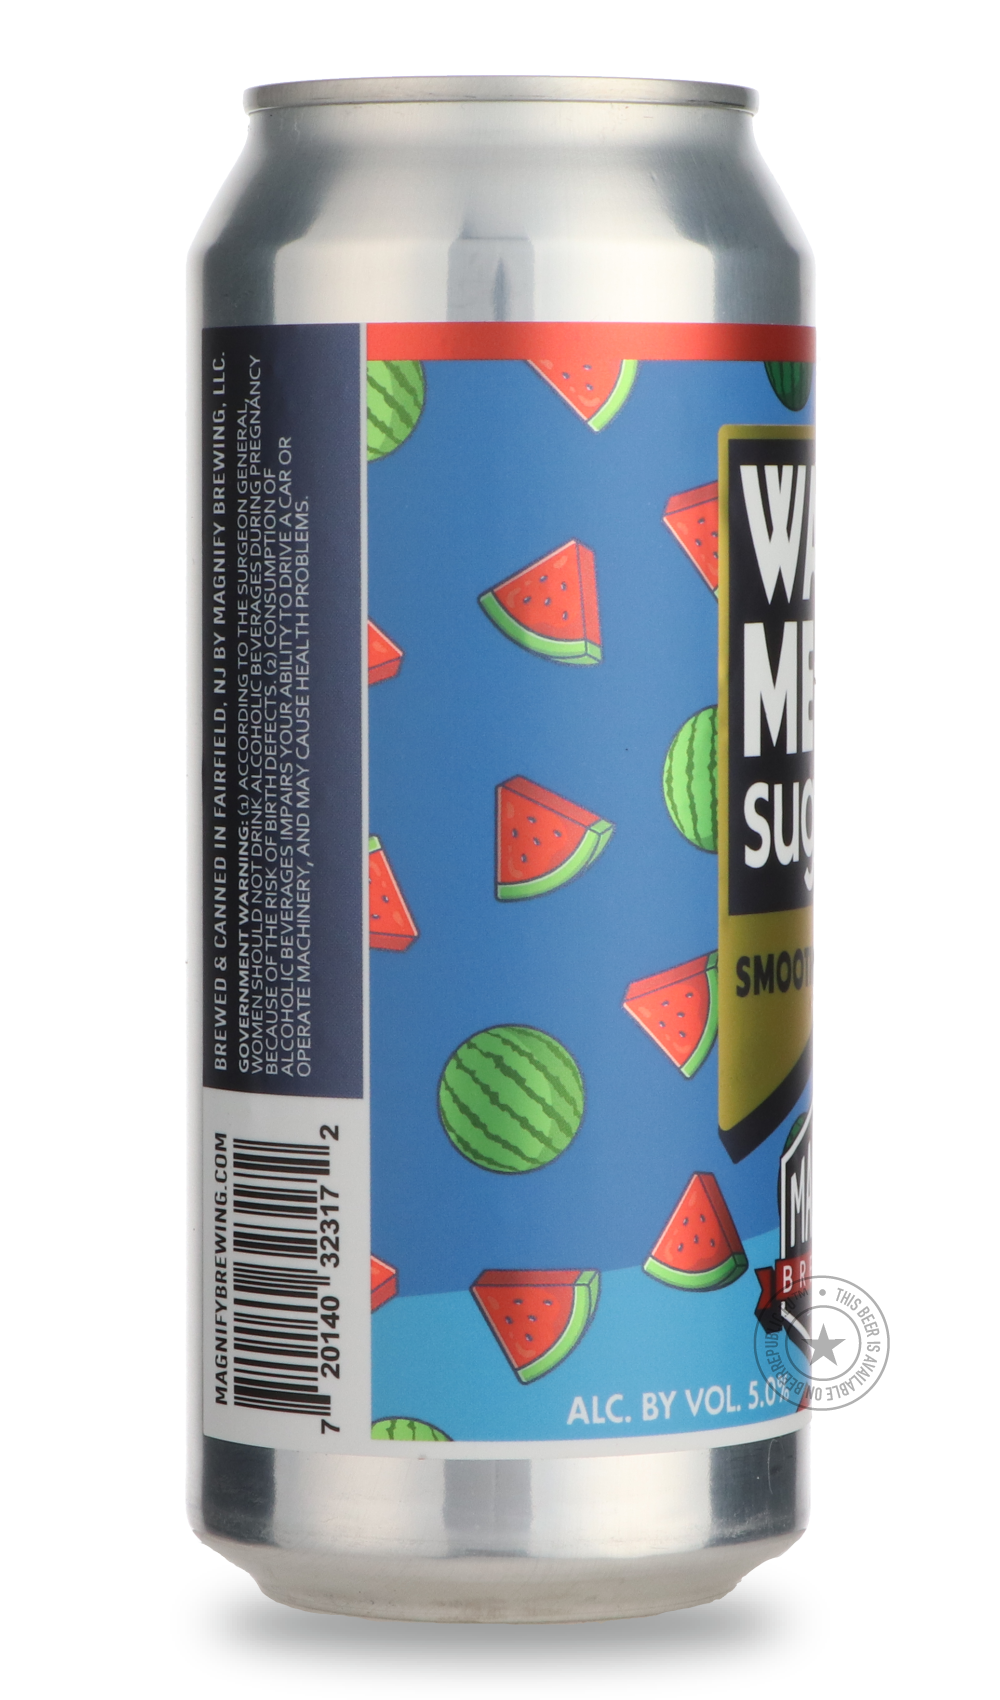 -Magnify- Watermelon Sugar-Sour / Wild & Fruity- Only @ Beer Republic - The best online beer store for American & Canadian craft beer - Buy beer online from the USA and Canada - Bier online kopen - Amerikaans bier kopen - Craft beer store - Craft beer kopen - Amerikanisch bier kaufen - Bier online kaufen - Acheter biere online - IPA - Stout - Porter - New England IPA - Hazy IPA - Imperial Stout - Barrel Aged - Barrel Aged Imperial Stout - Brown - Dark beer - Blond - Blonde - Pilsner - Lager - Wheat - Weizen